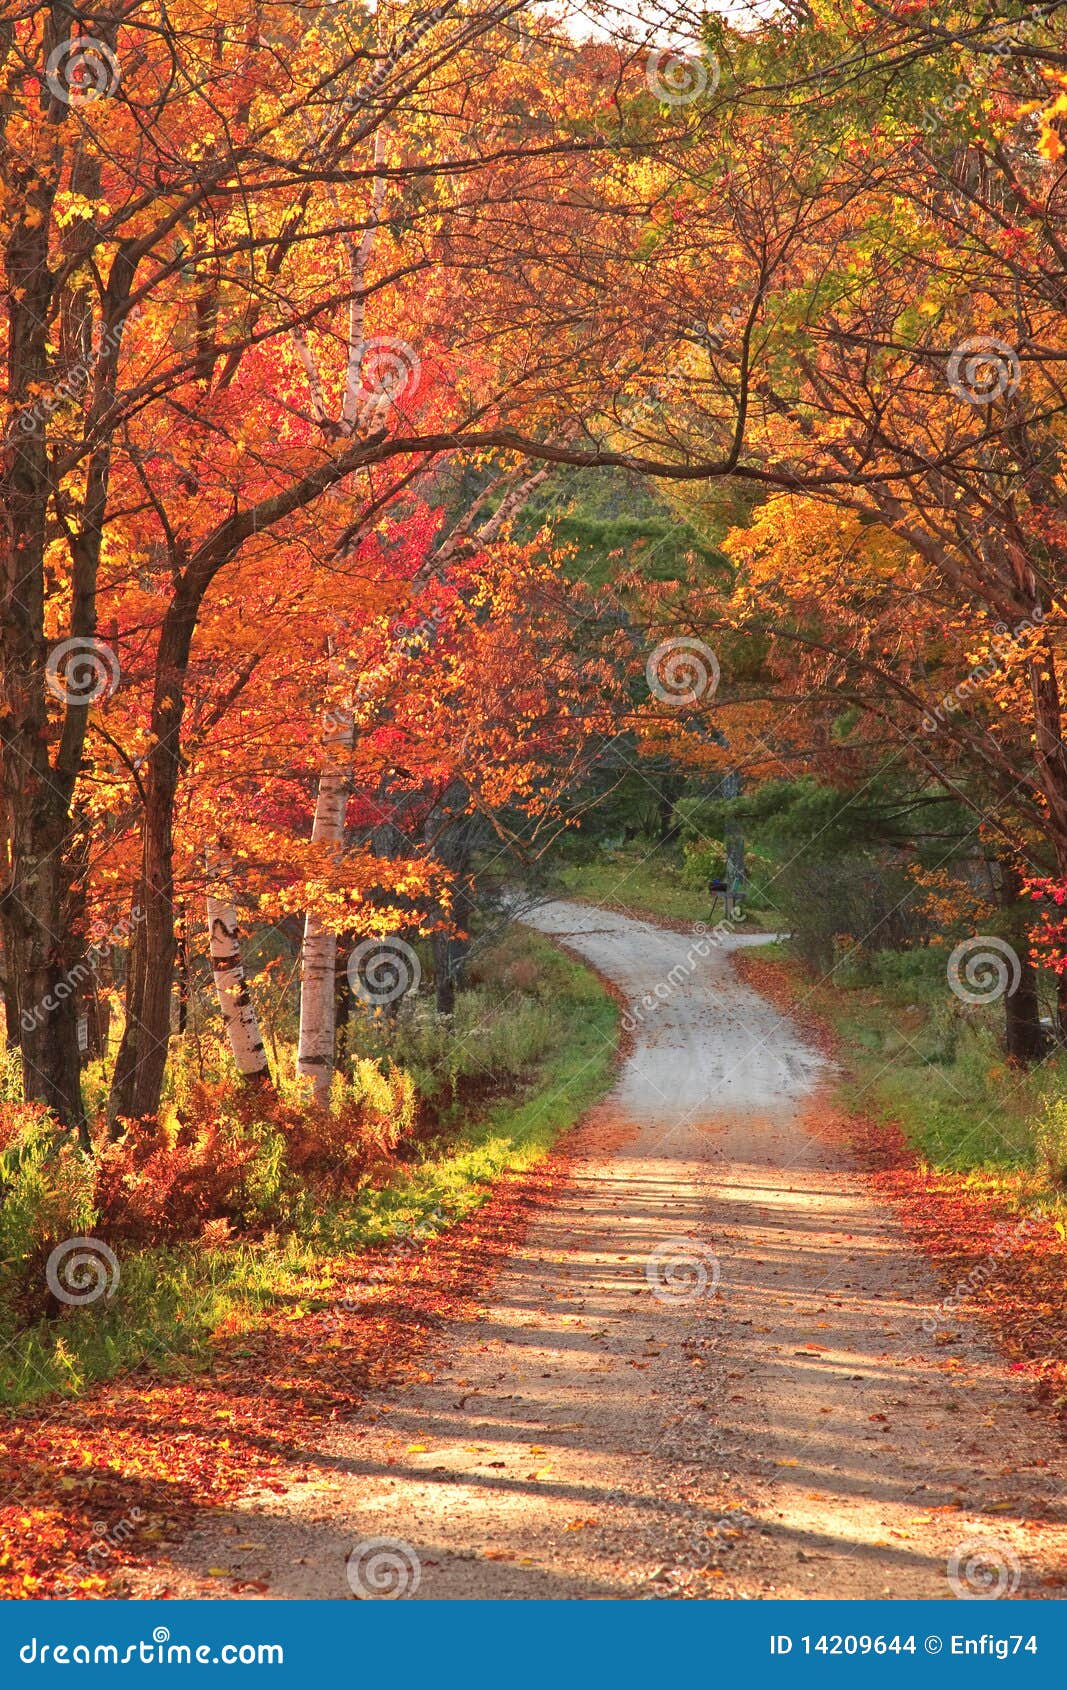 vermont countryside road during autumn